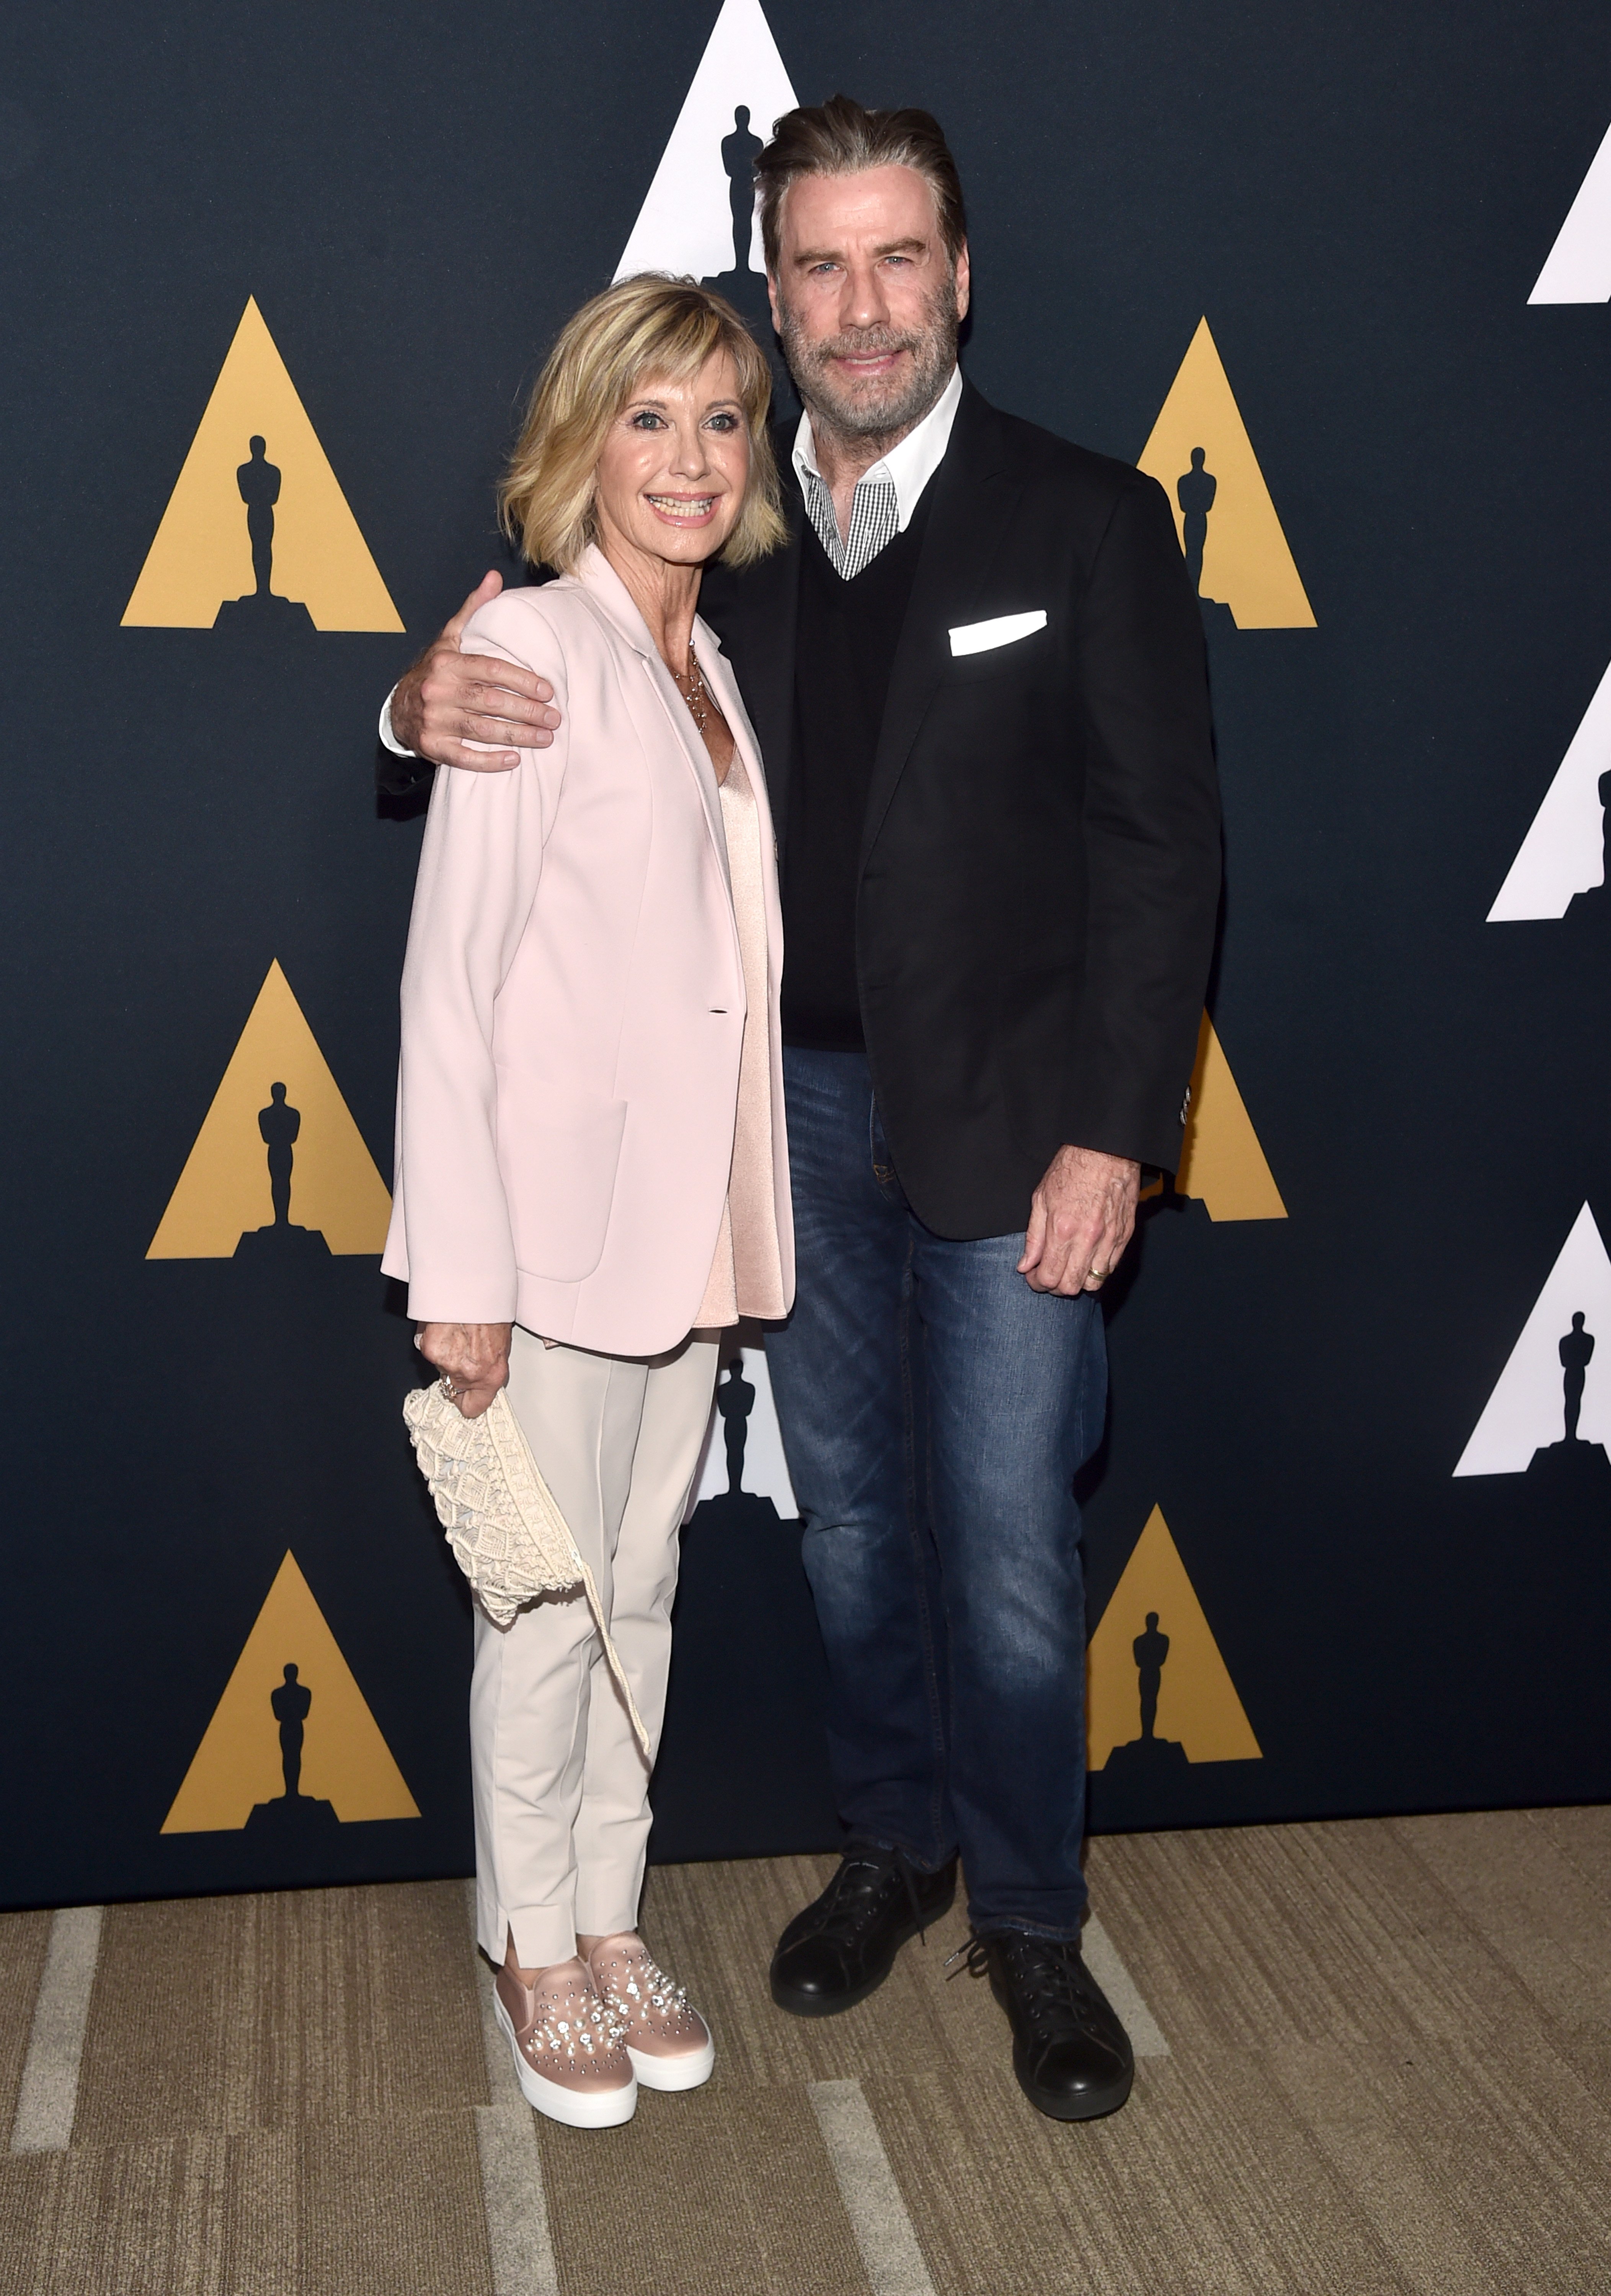 Olivia Newton-John and John Travolta attend the "Grease" 40th anniversary screening on August 15, 2018, in Beverly Hills, California. | Source: Getty Images.